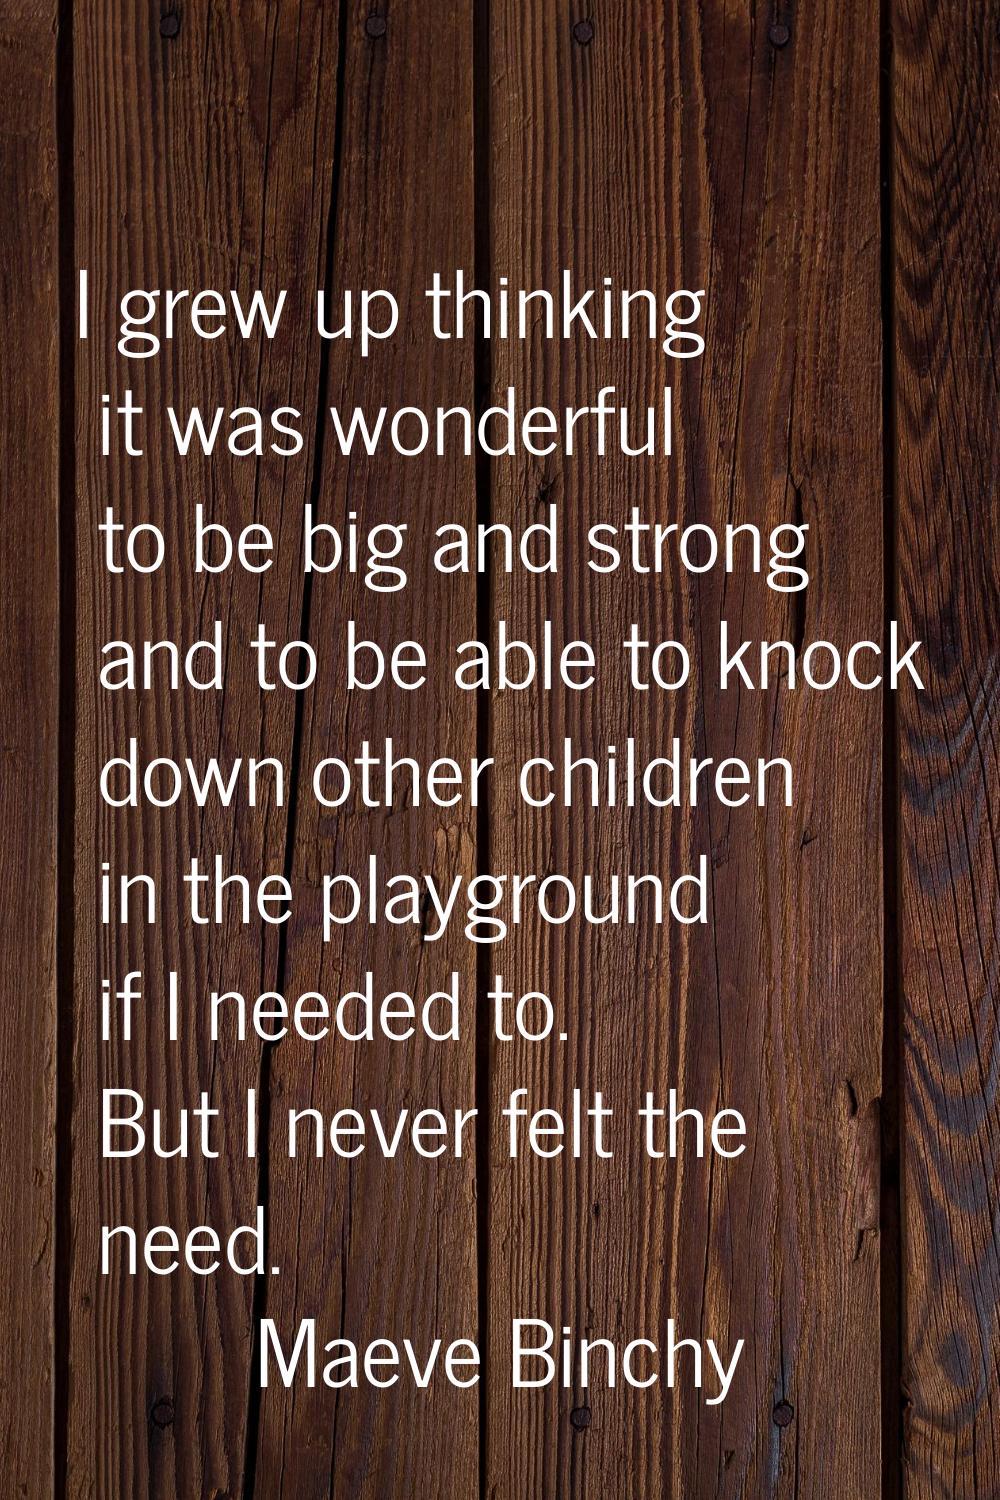 I grew up thinking it was wonderful to be big and strong and to be able to knock down other childre